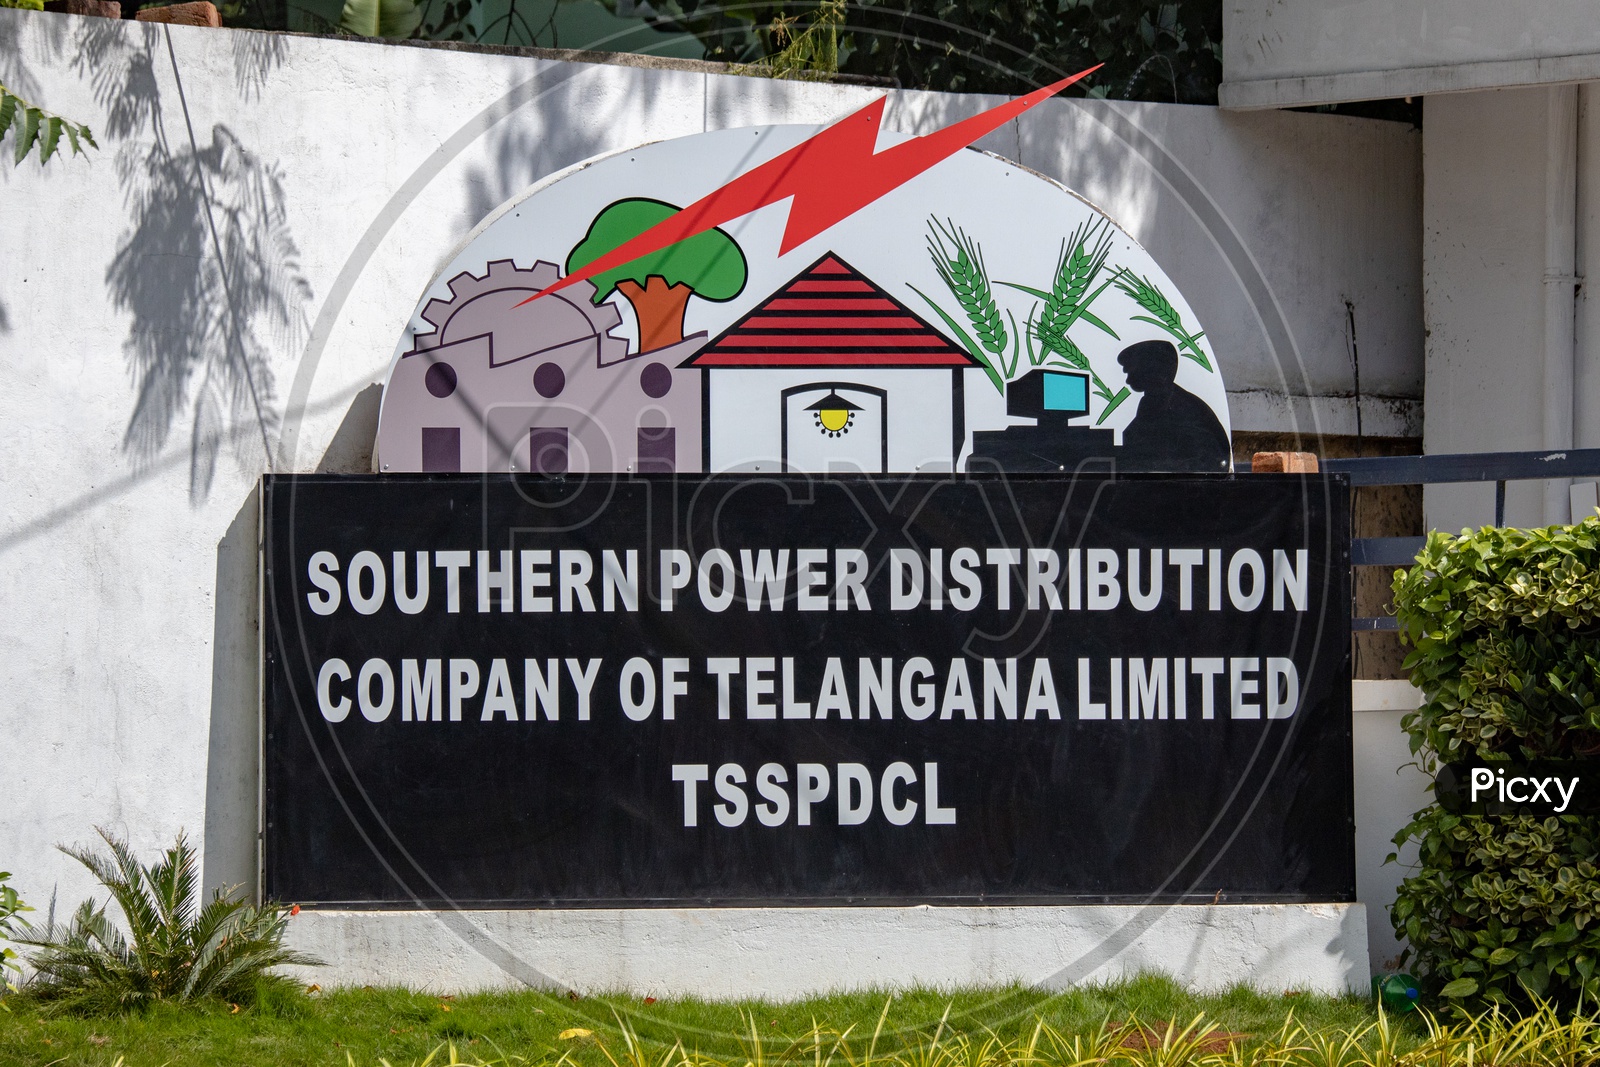 TSSPDCL  Southern Power Distribution Company of Telangana limited